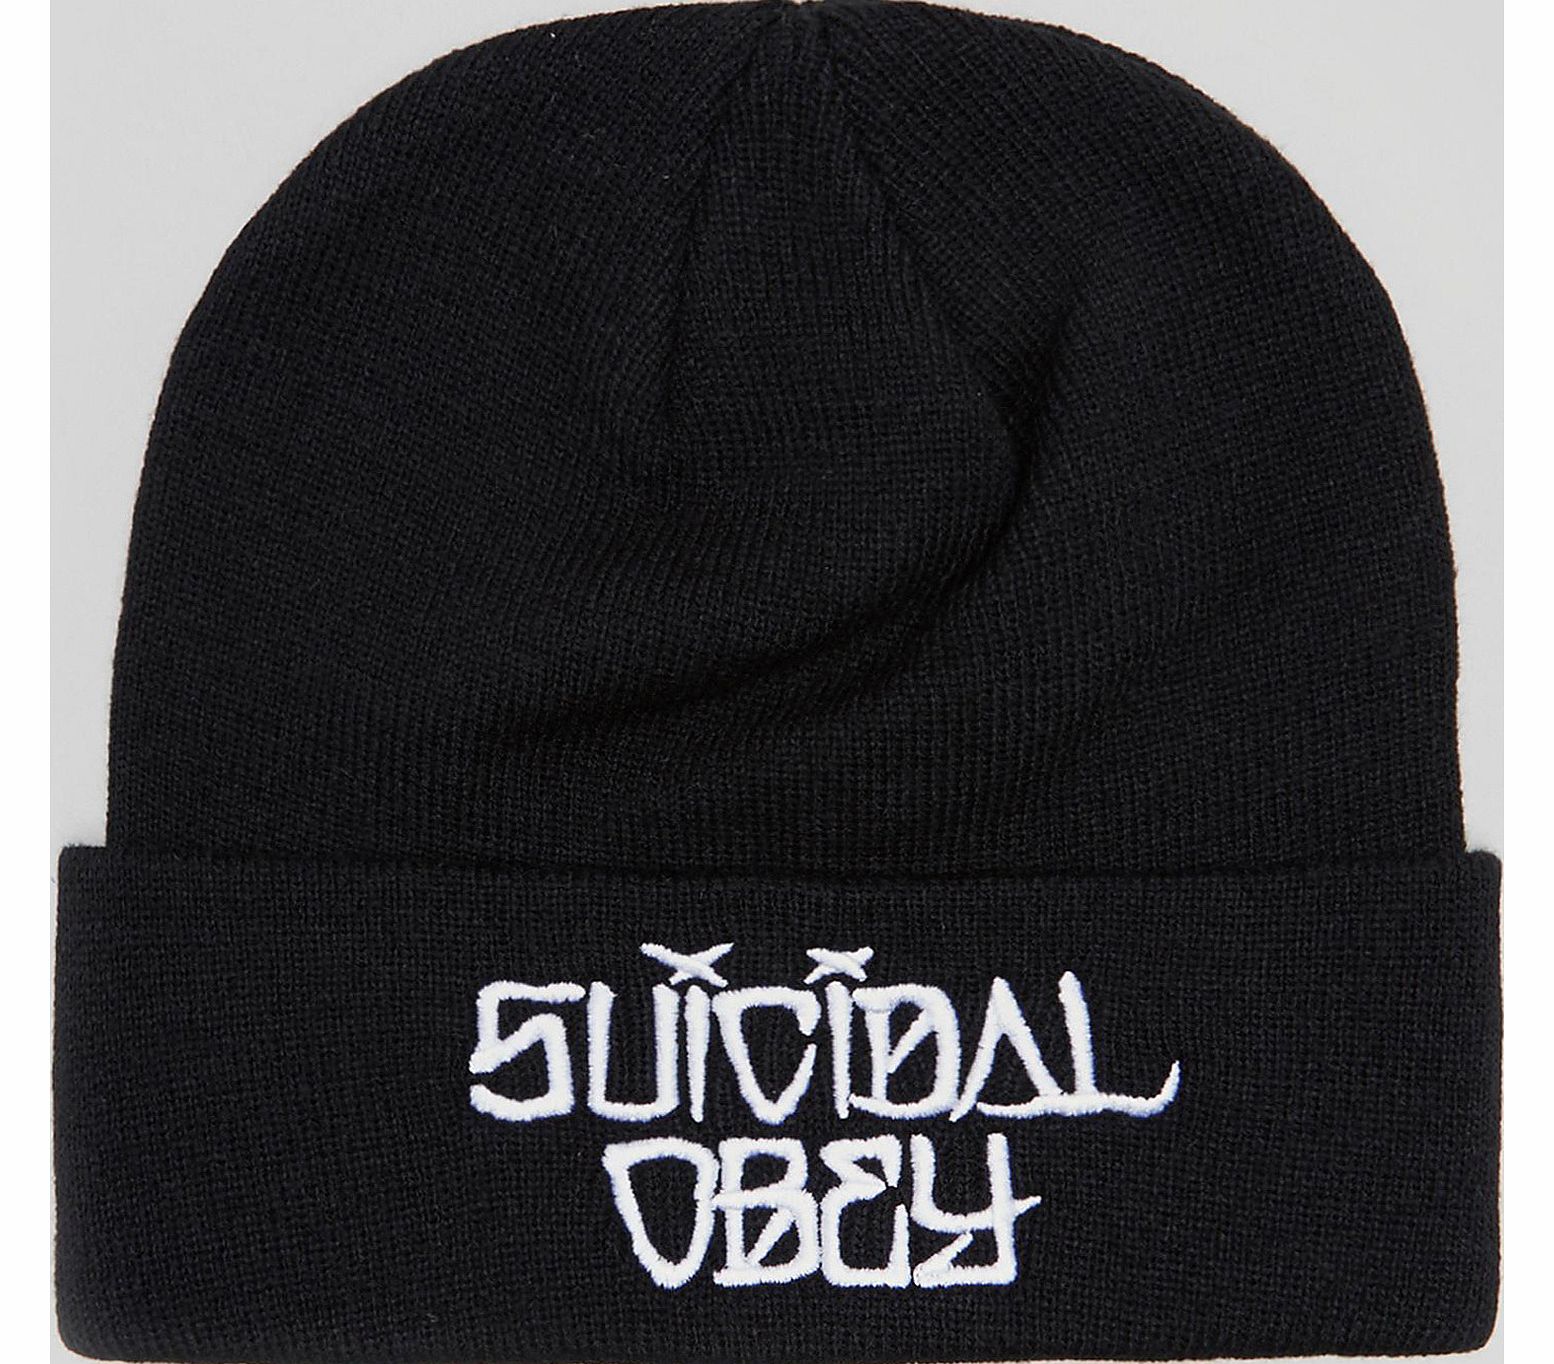 Obey Suicidal Beanie Hat